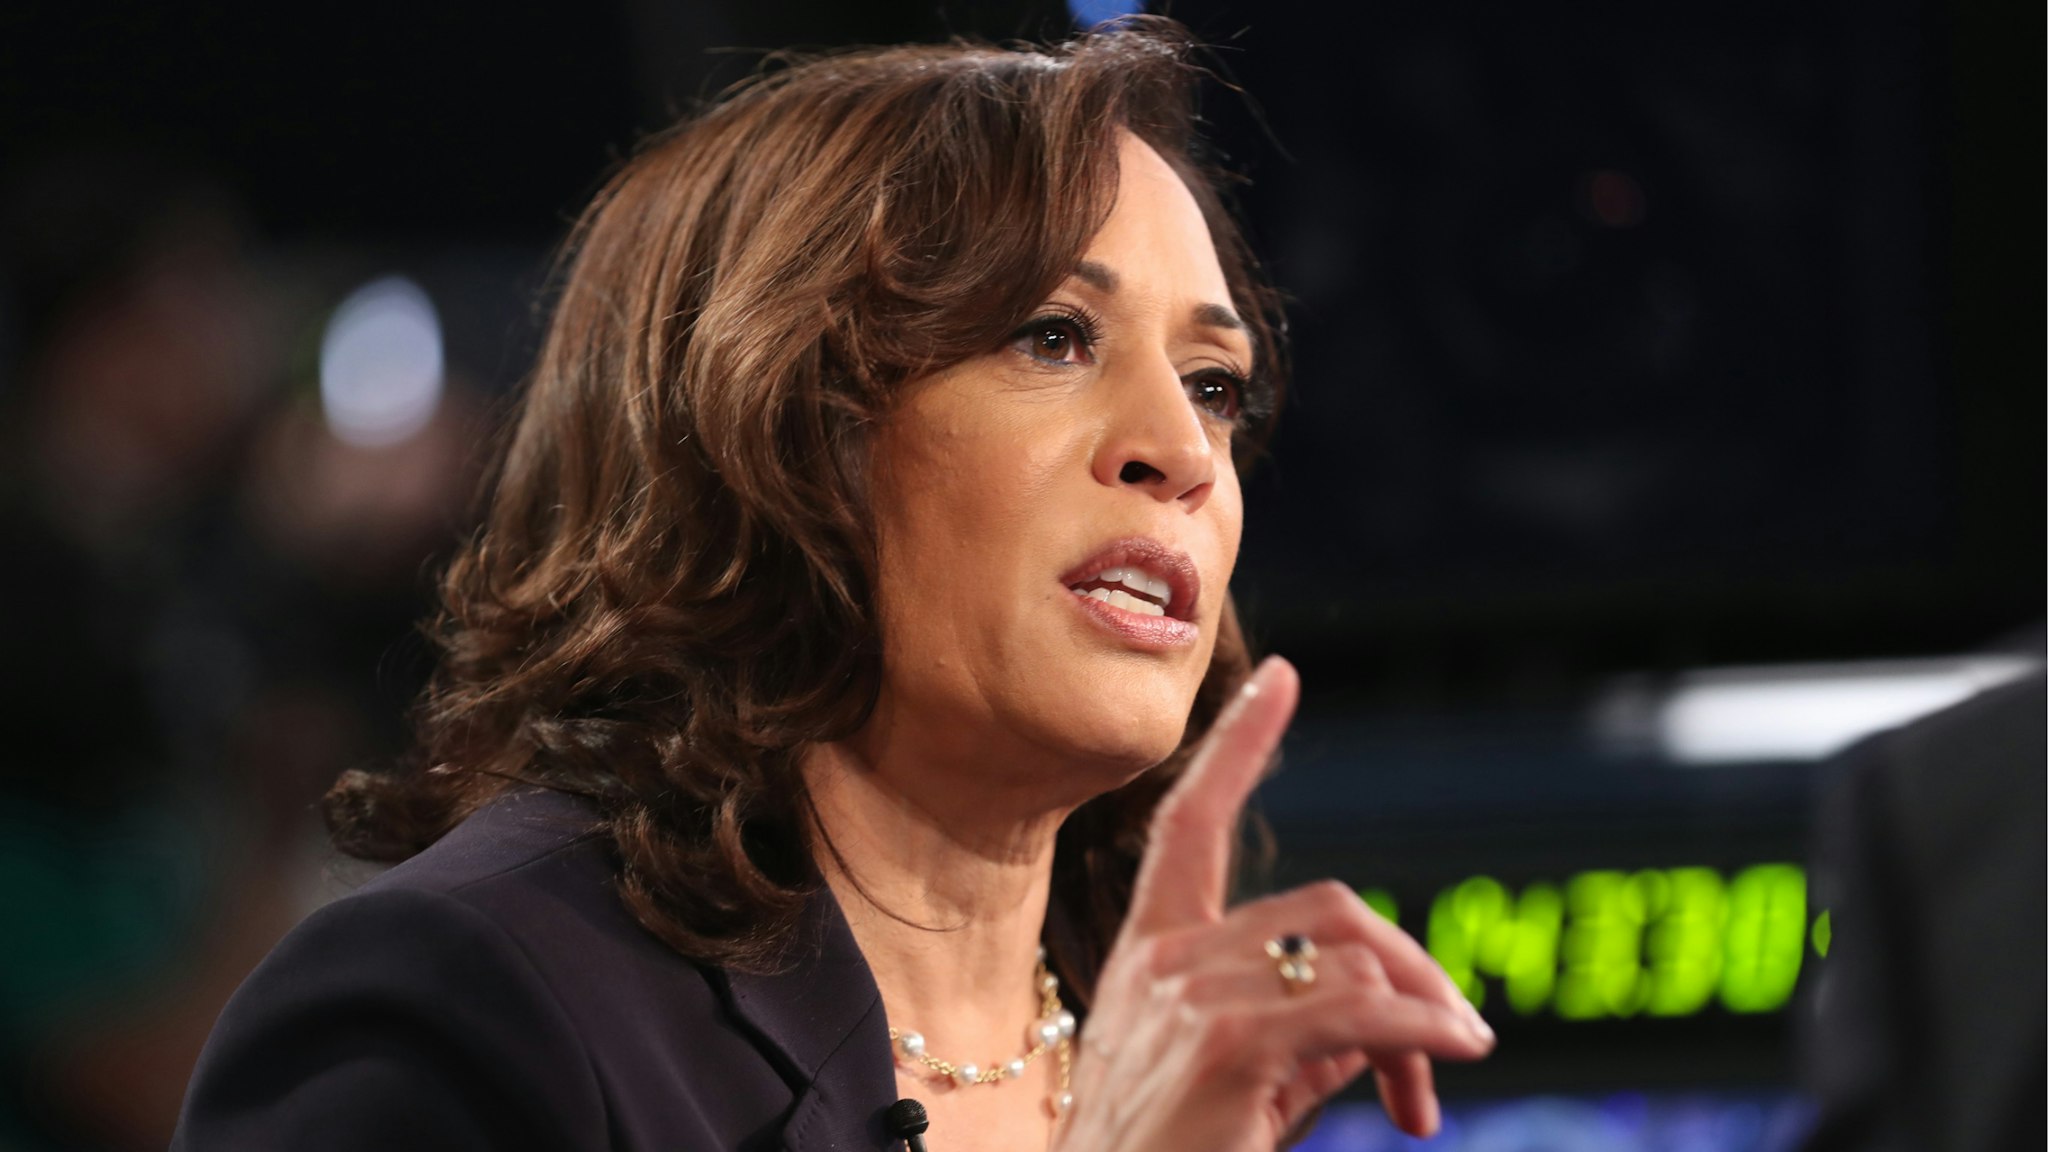 Democratic presidential candidate Sen. Kamala Harris (D-CA) speaks during a television interview after the second night of the first Democratic presidential debate on June 27, 2019 in Miami, Florida.